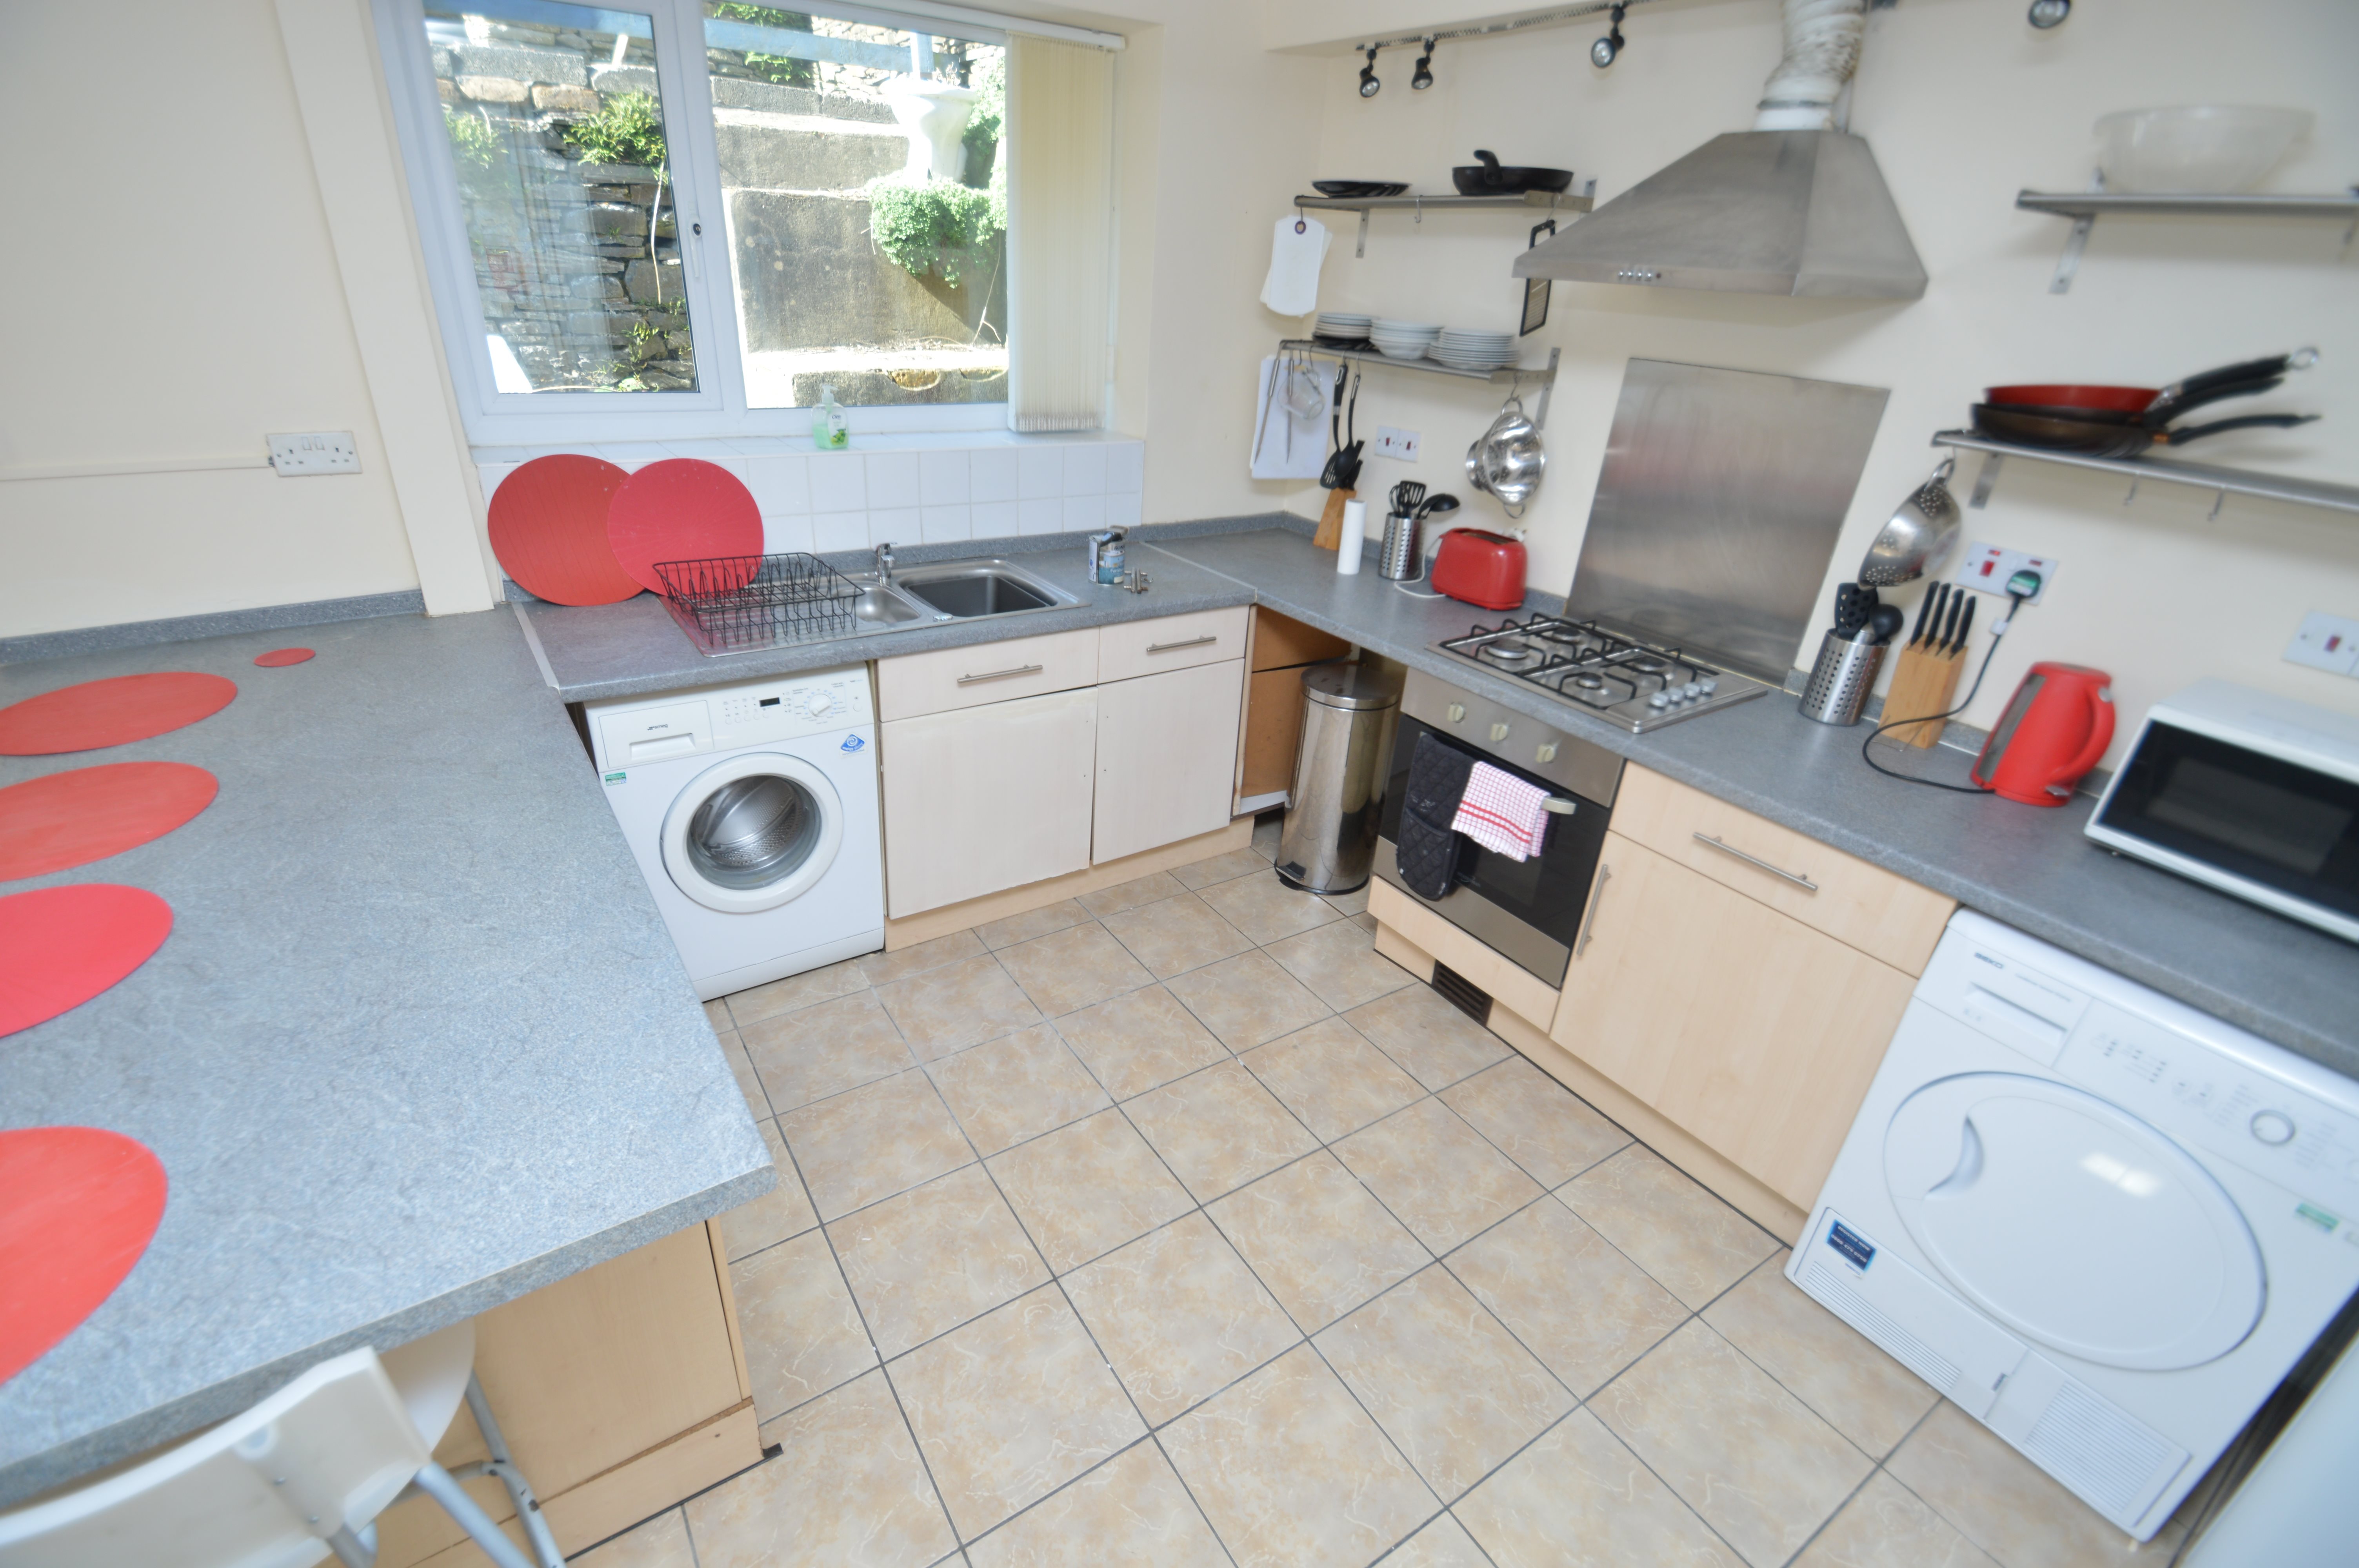 1 bed house / flat share to rent in Wood Road , Treforest   - Property Image 5